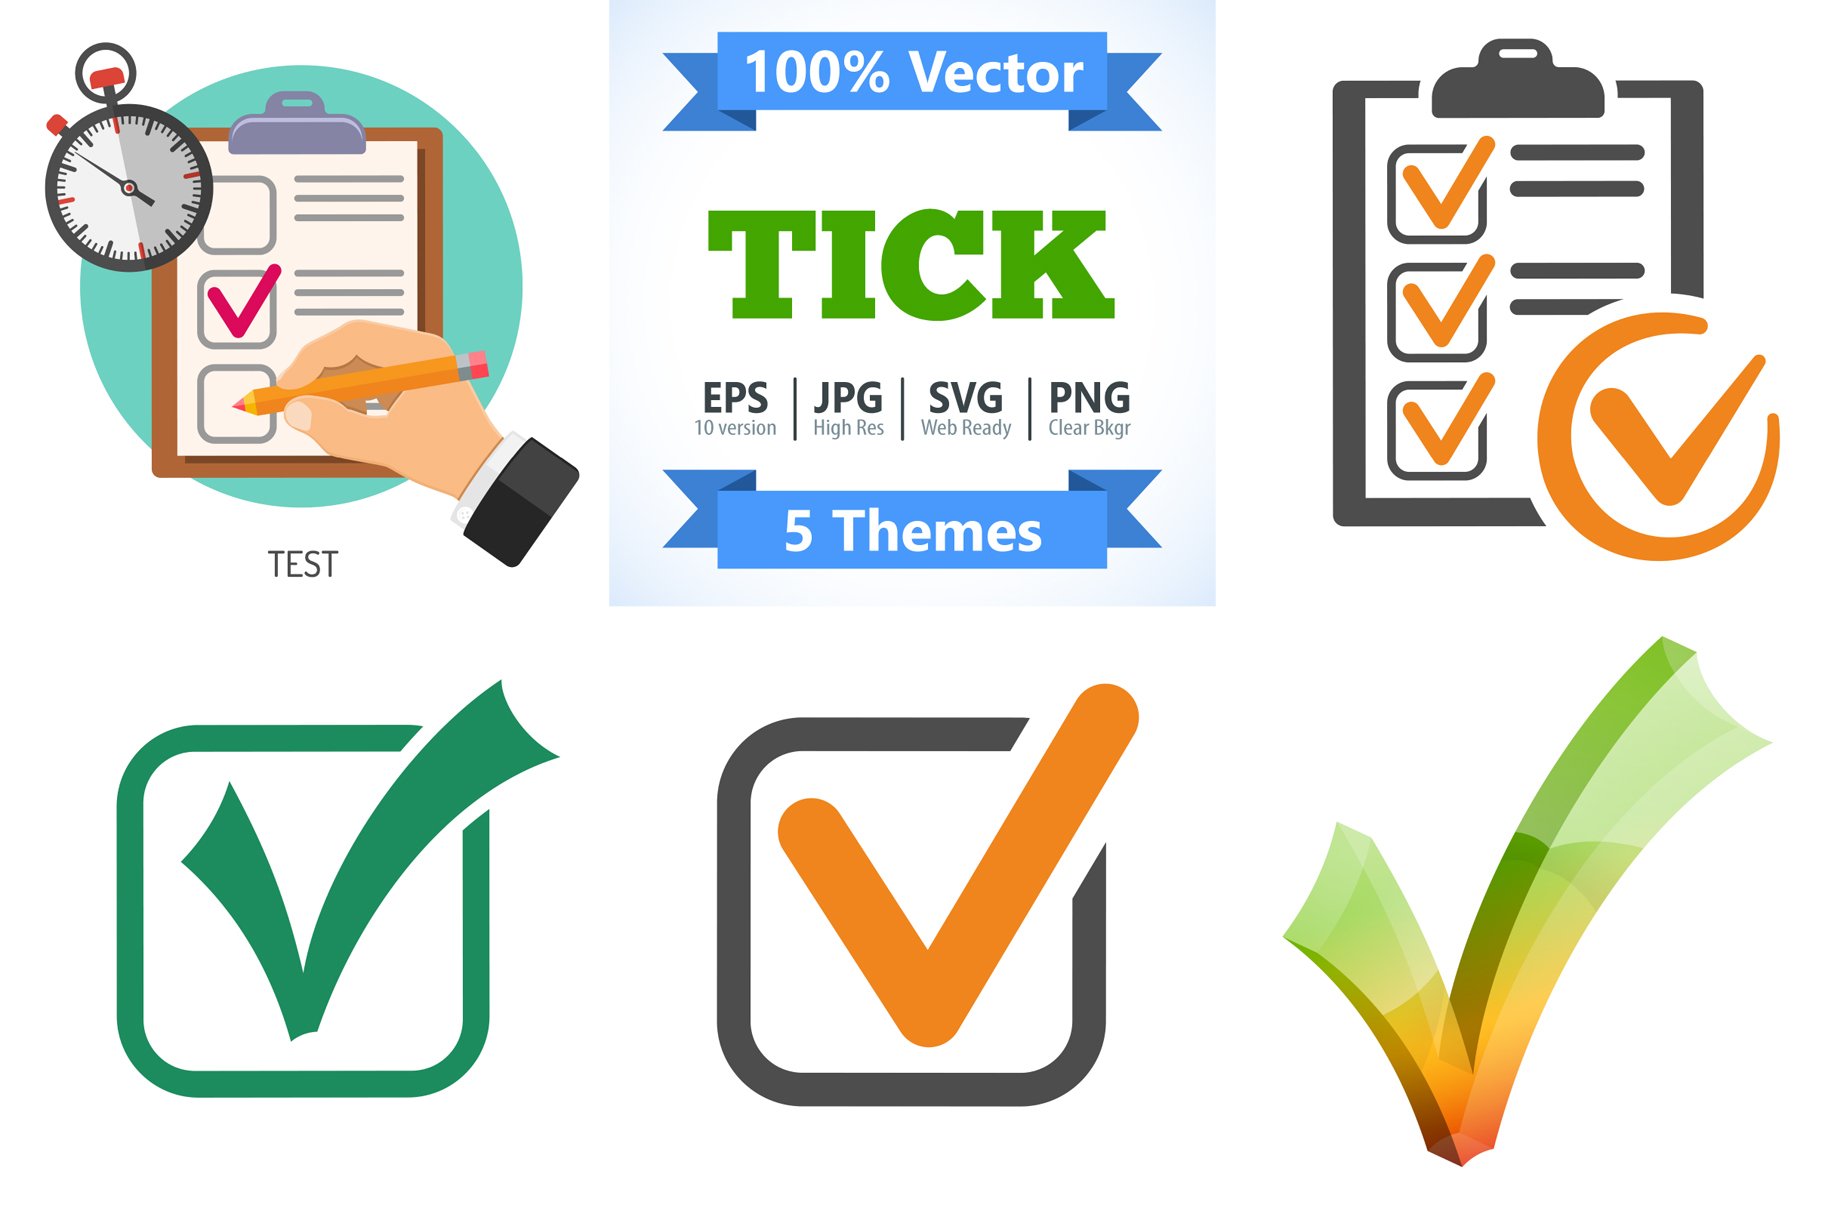 Online Test Concepts and Ticks Icons cover image.